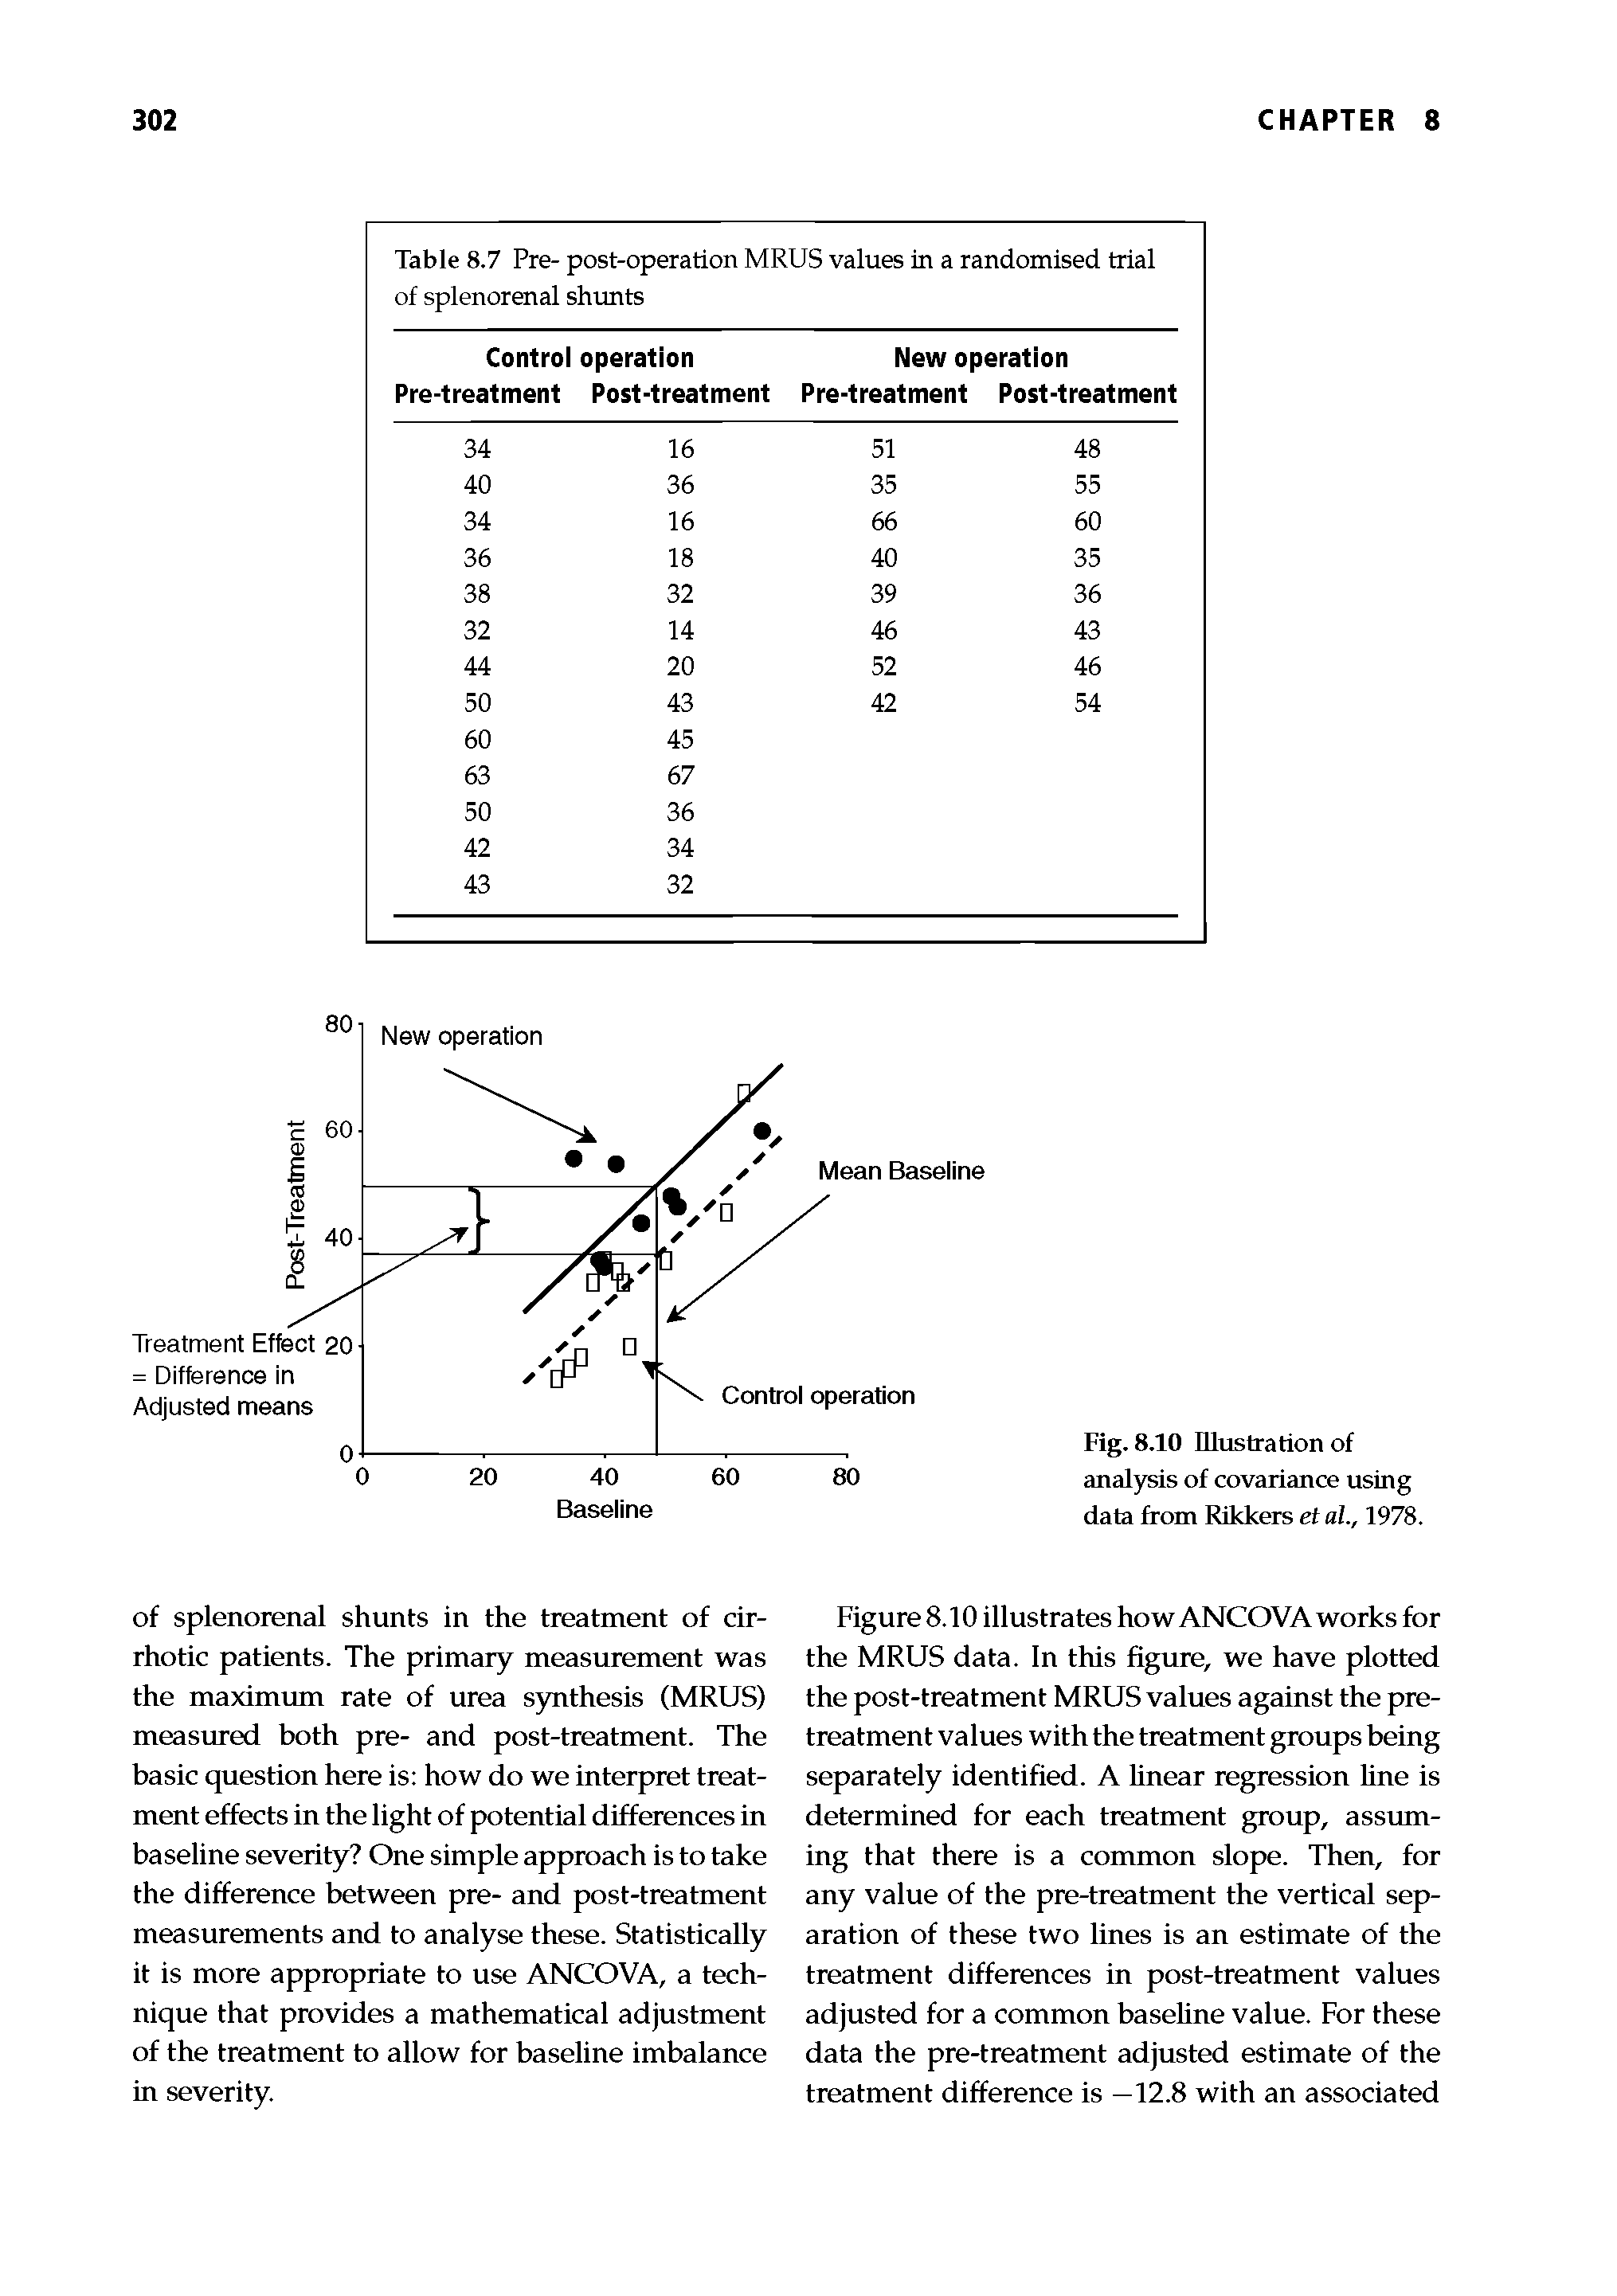 Fig. 8.10 Illustration of analysis of covariance using data from Rikkers et al., 1978.